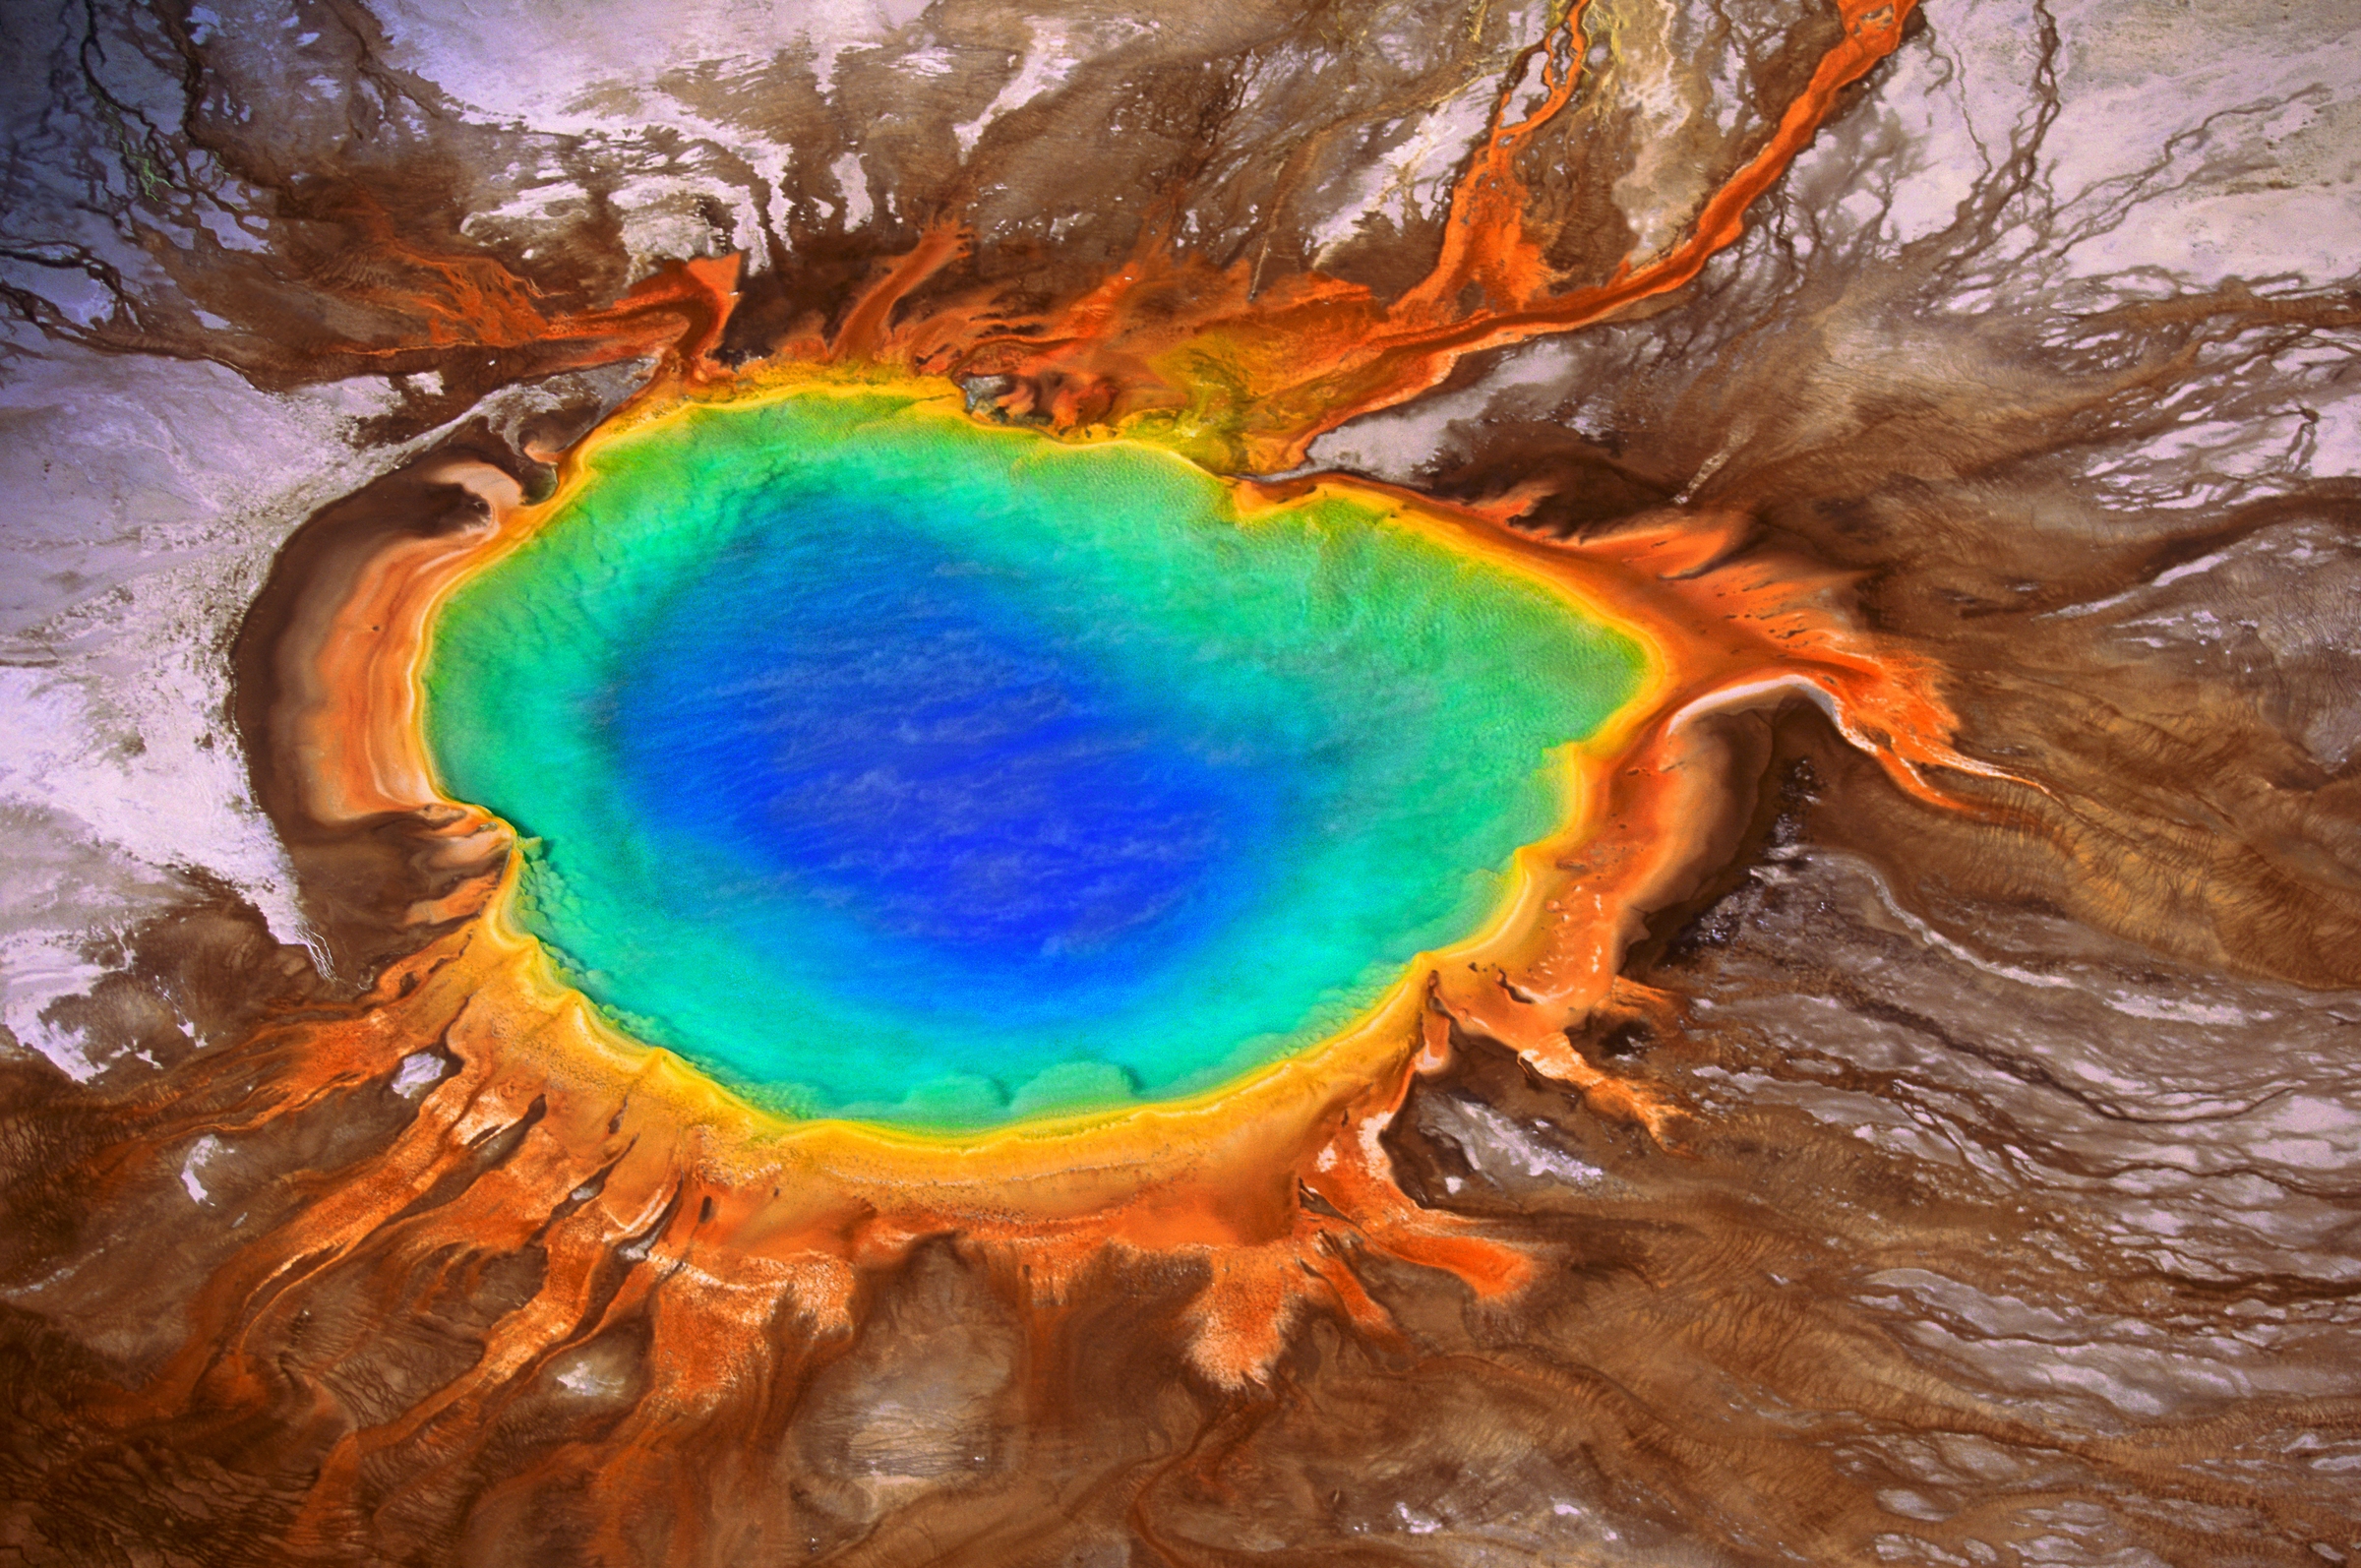 Grand Prismatic Spring, Yellowstone National Park, Wyoming, USA - Art Wolfe